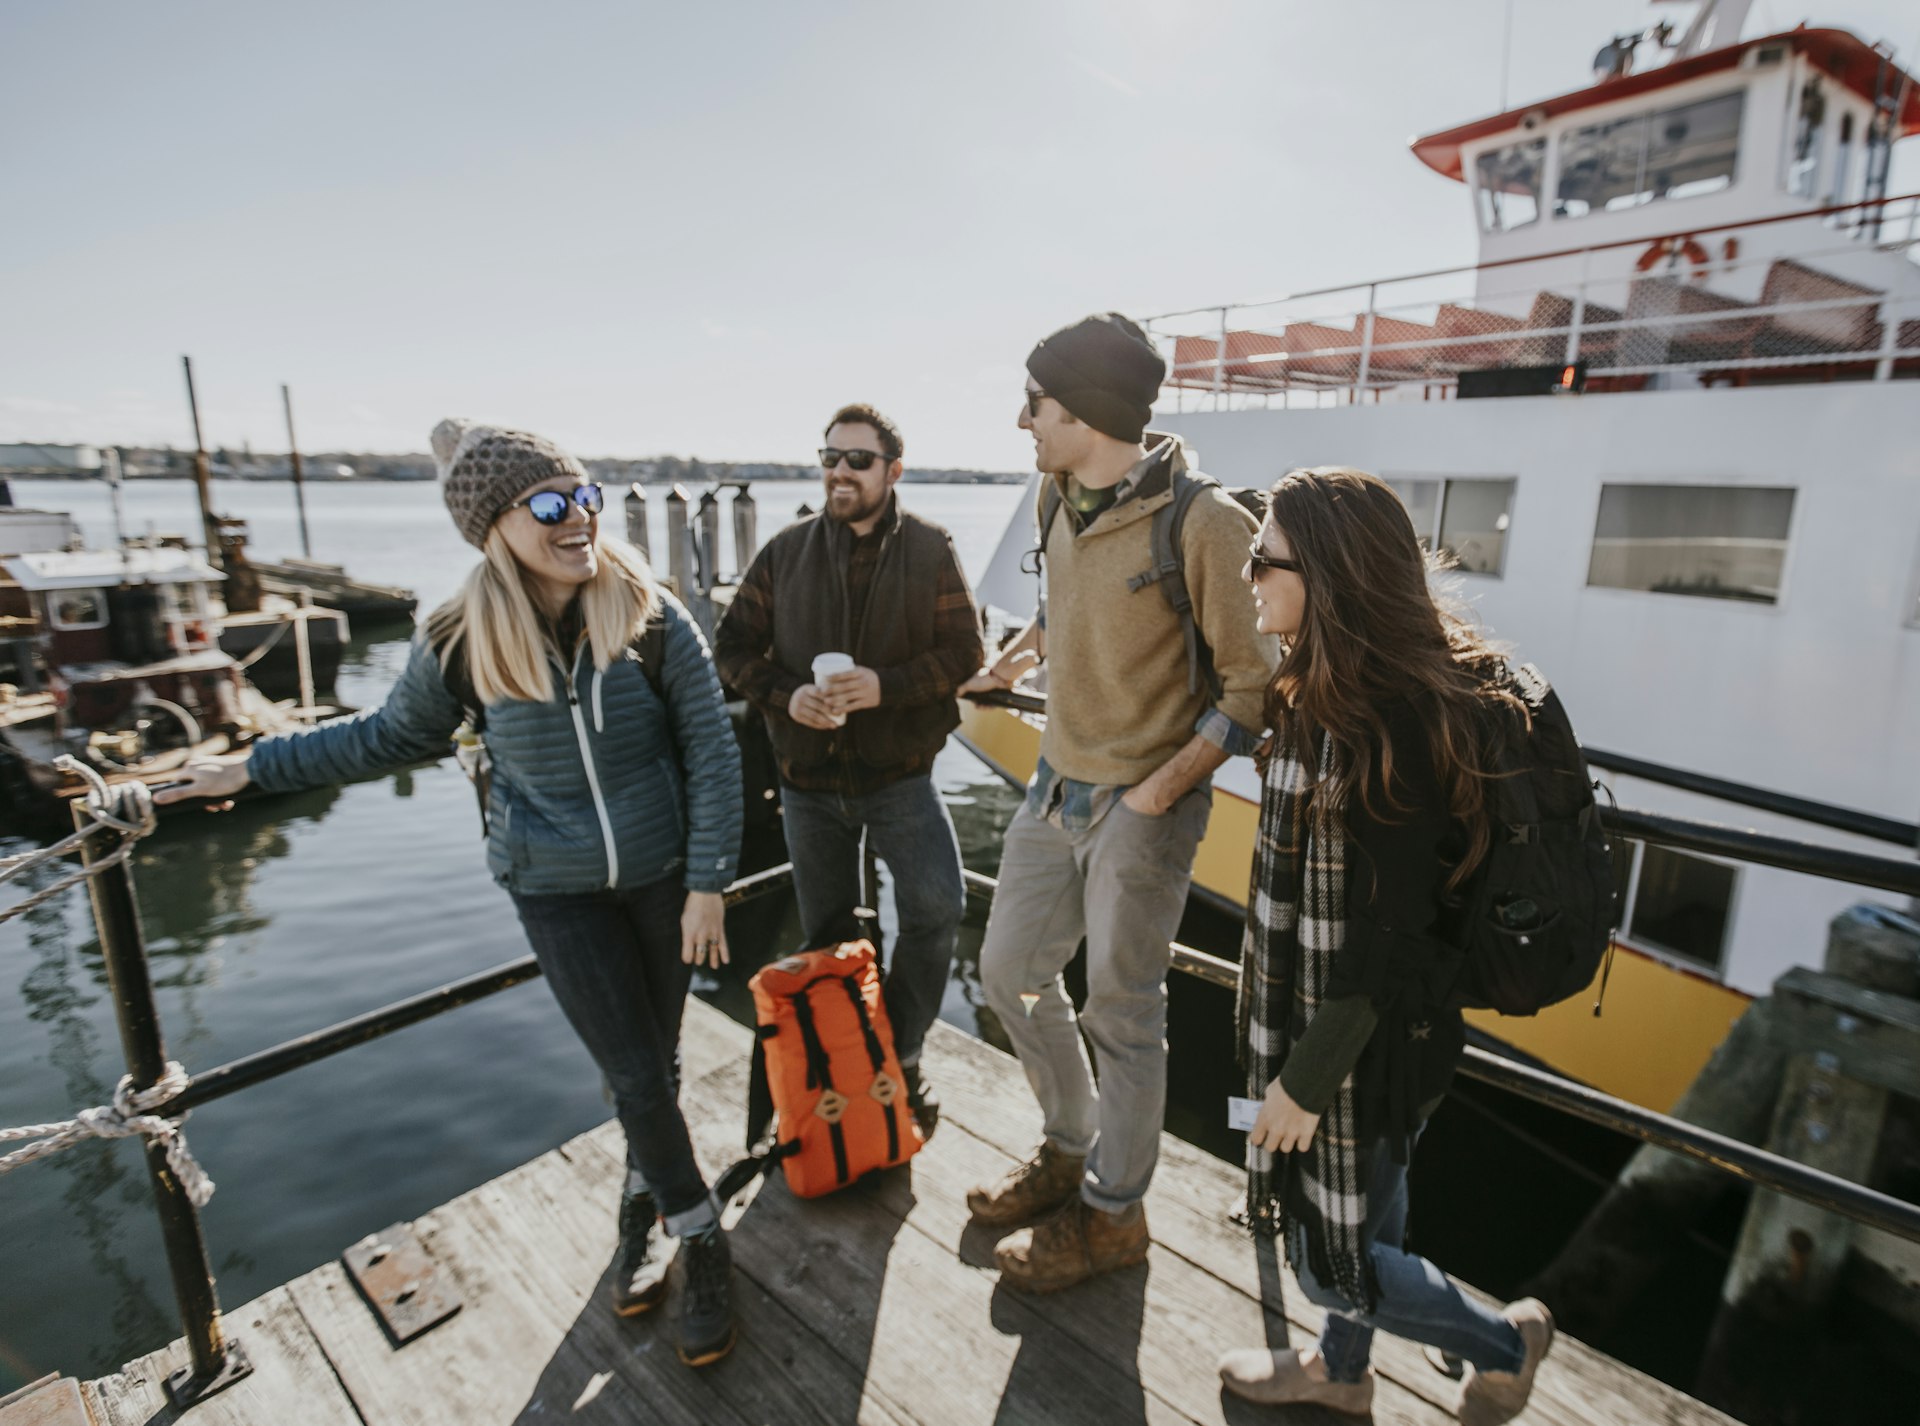 Four young adult friends wait on the waterfront in Portland, Maine